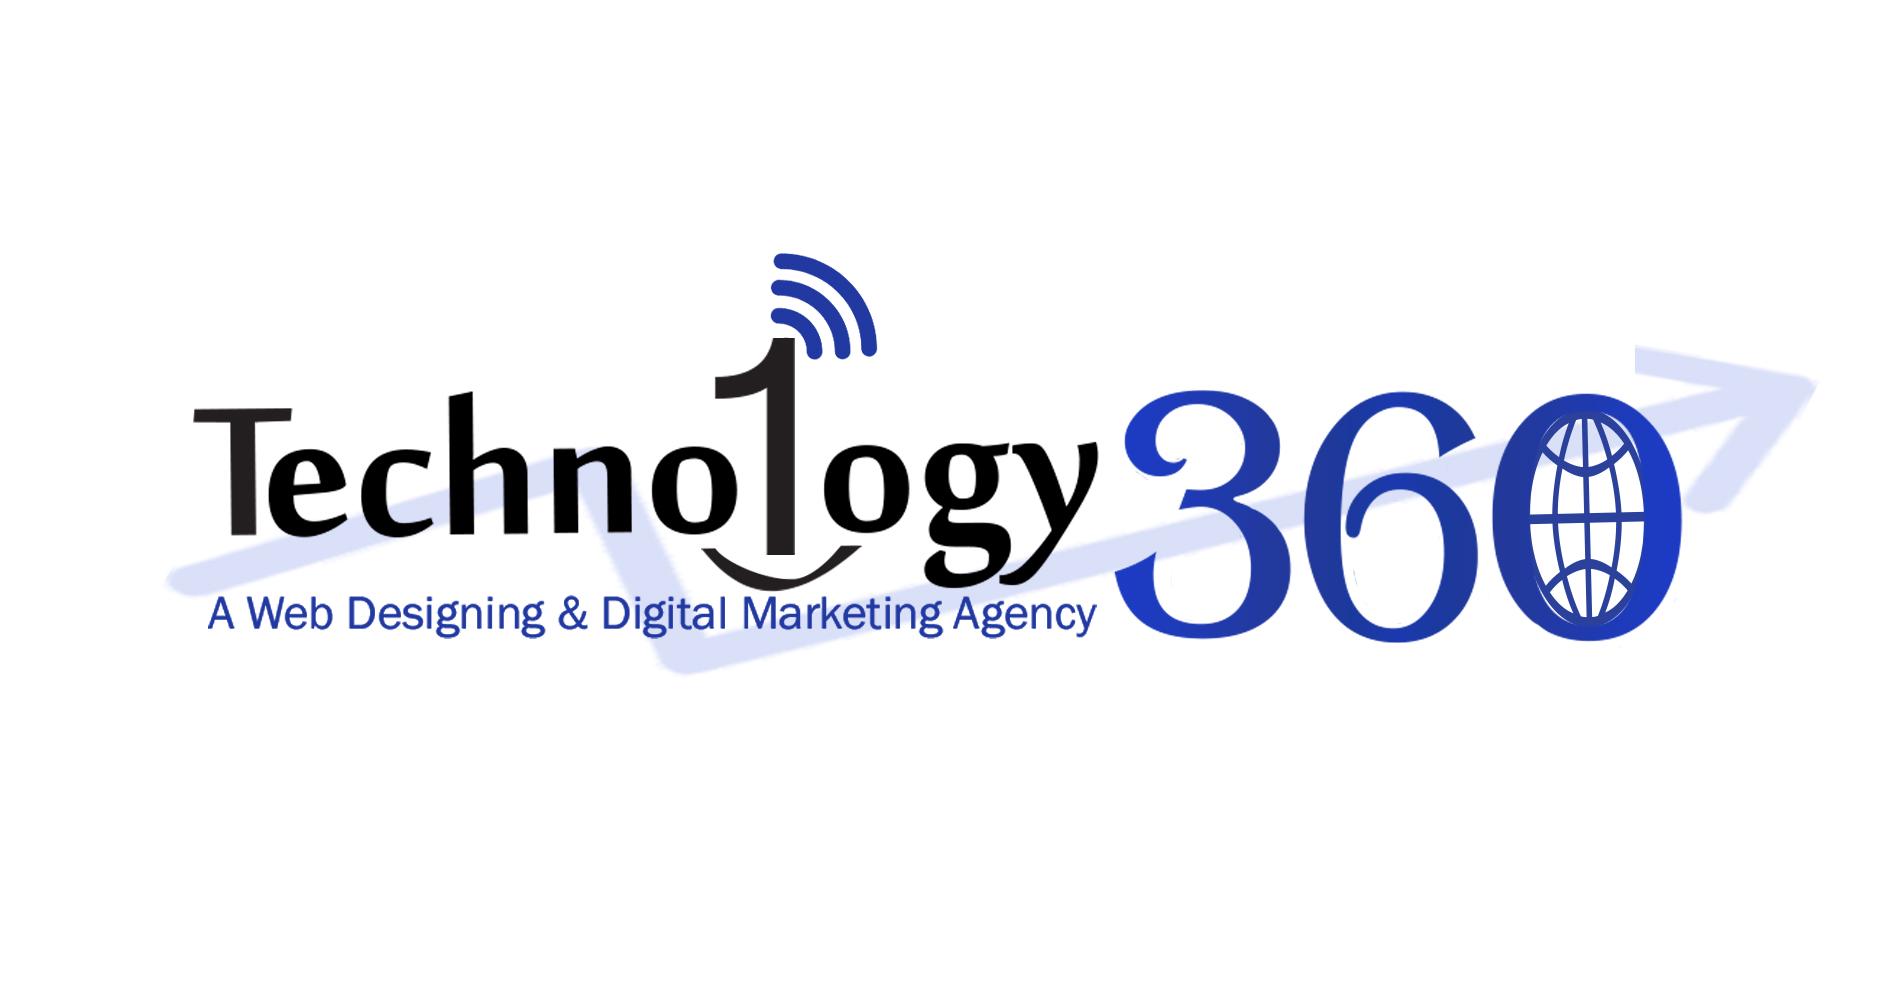 Technology360 profile on Qualified.One